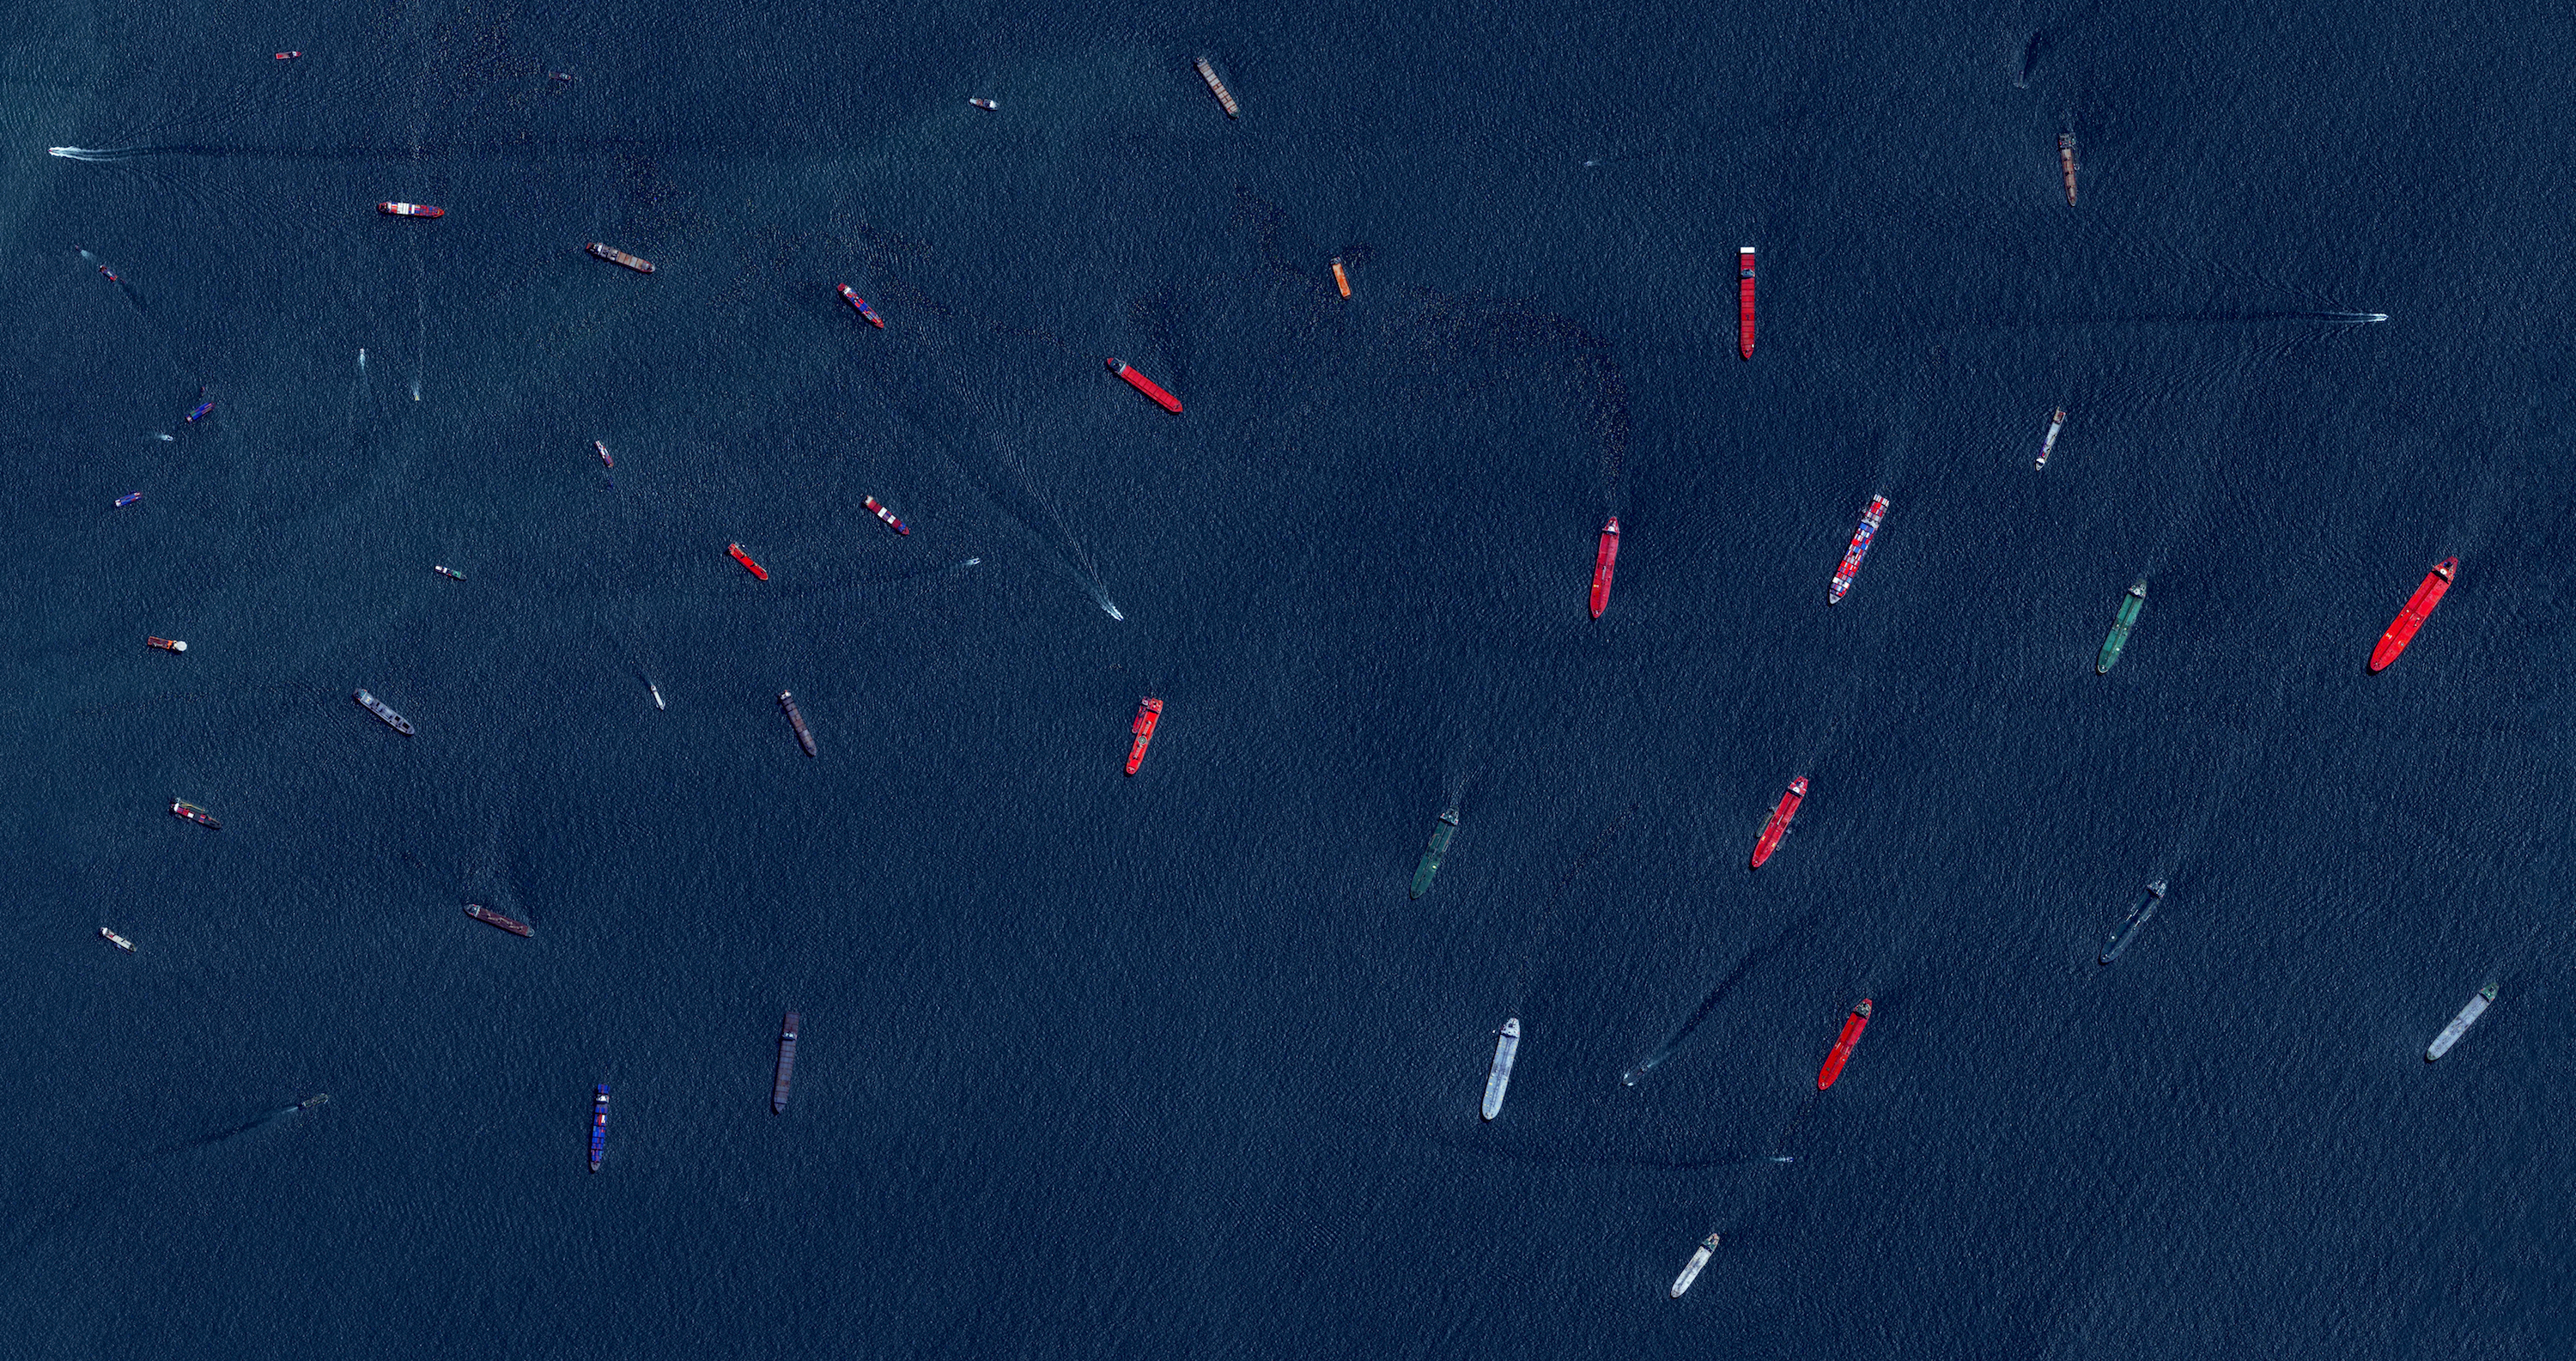 Port of Singapore: Cargo ships and tankers – some weighing up to 300,000 tonnes – wait outside the entry to the Port of Singapore. The facility is the world’s second-busiest port in terms of total tonnage, shipping a fifth of the world’s cargo containers and half of the world’s annual supply of crude oil.